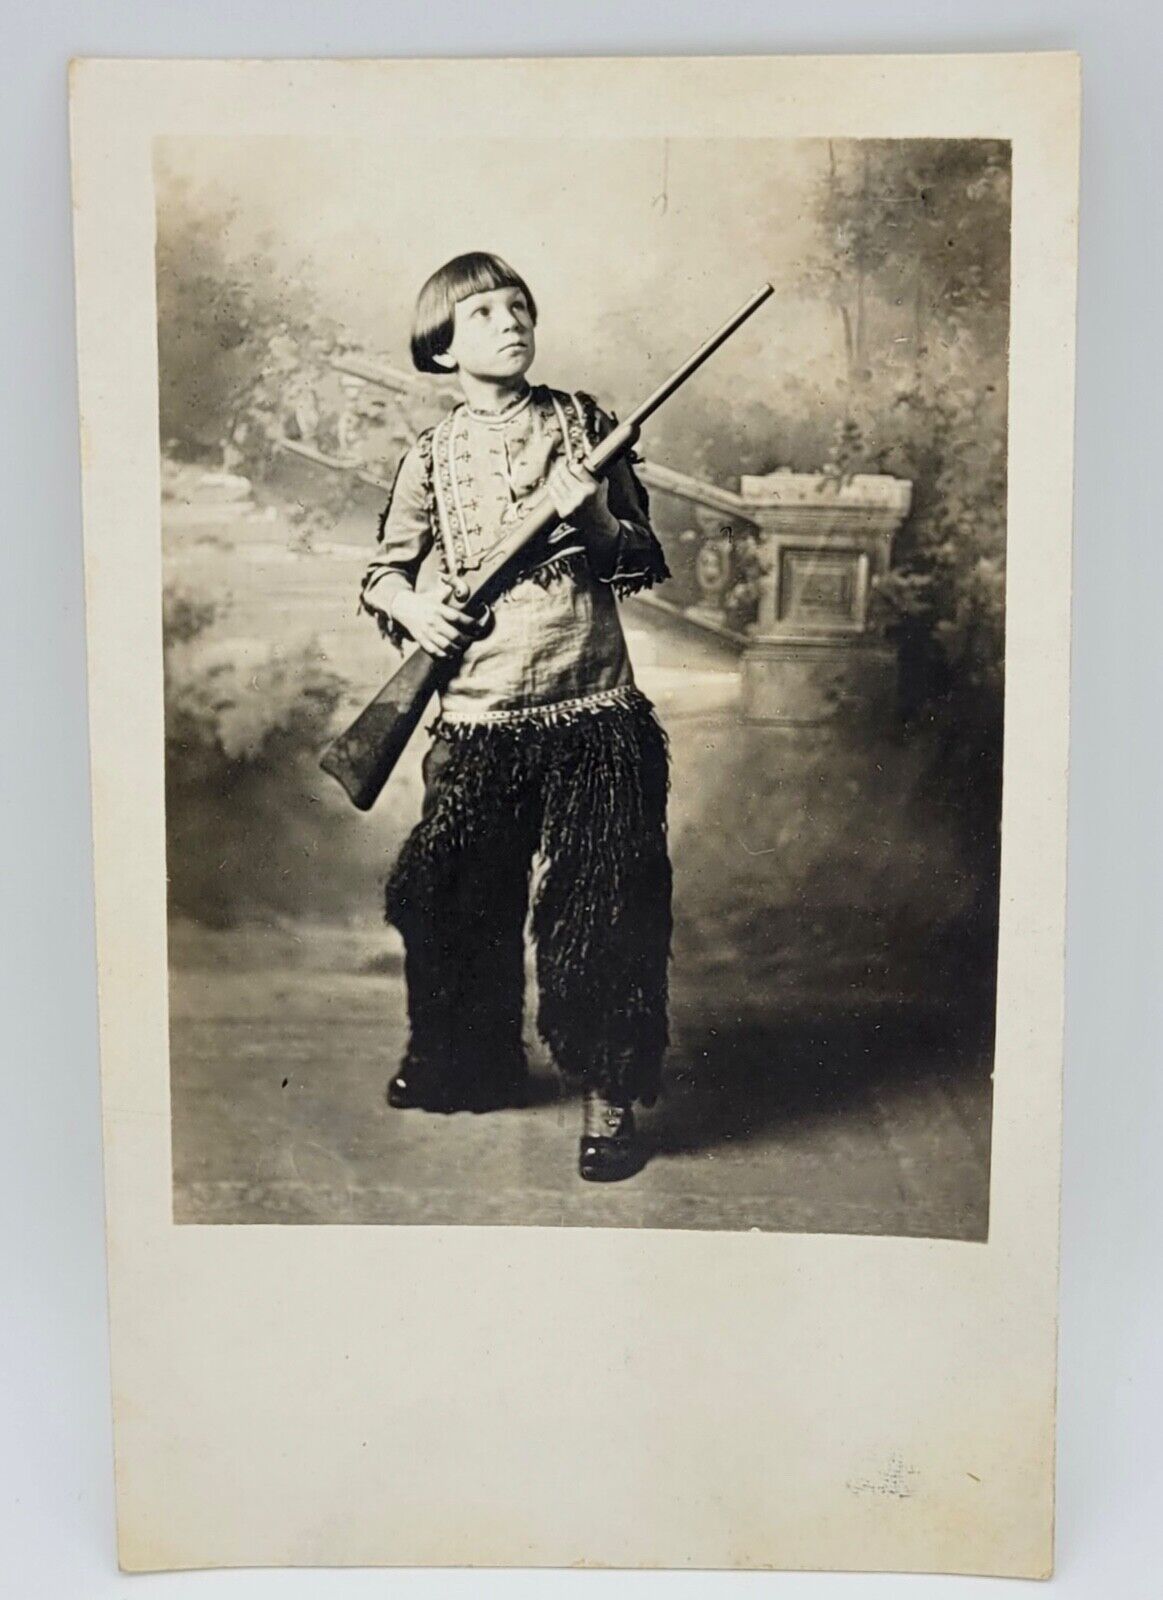 RPPC~Boy Holding Rifle Decked Out in Wooly Chaps & Western Wear~Staged Photo